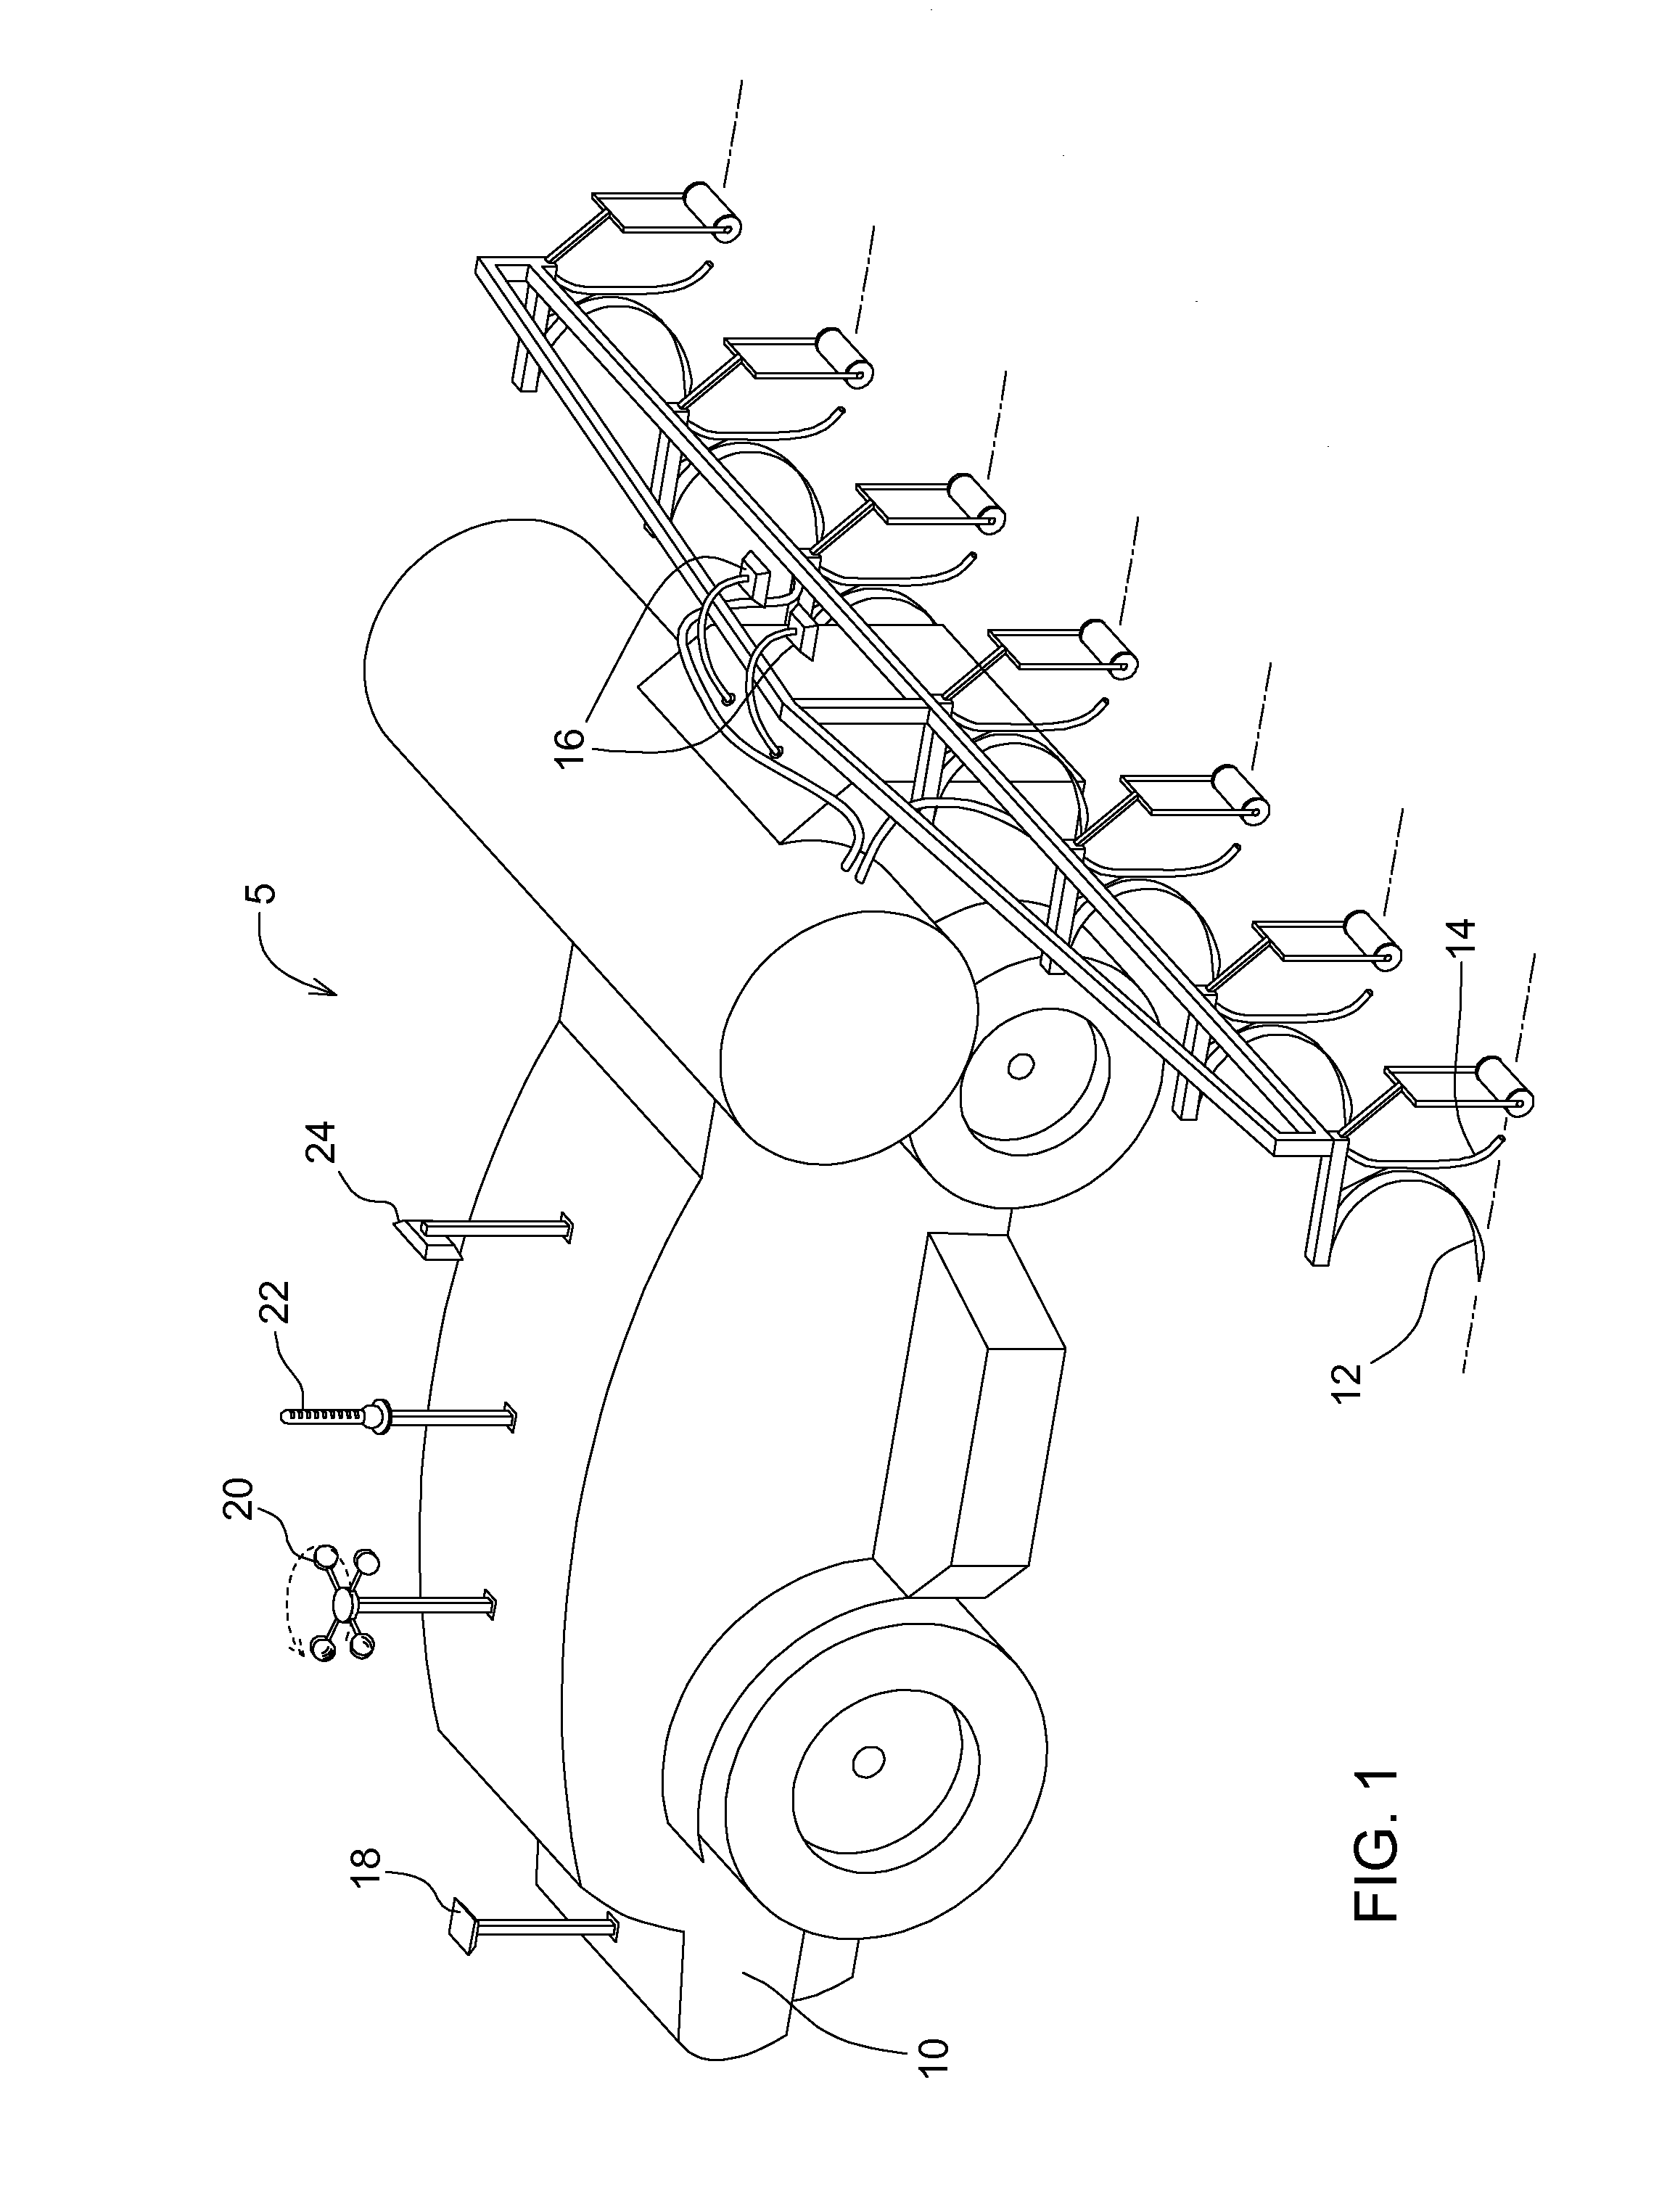 System and method to monitor gaseous concentrations